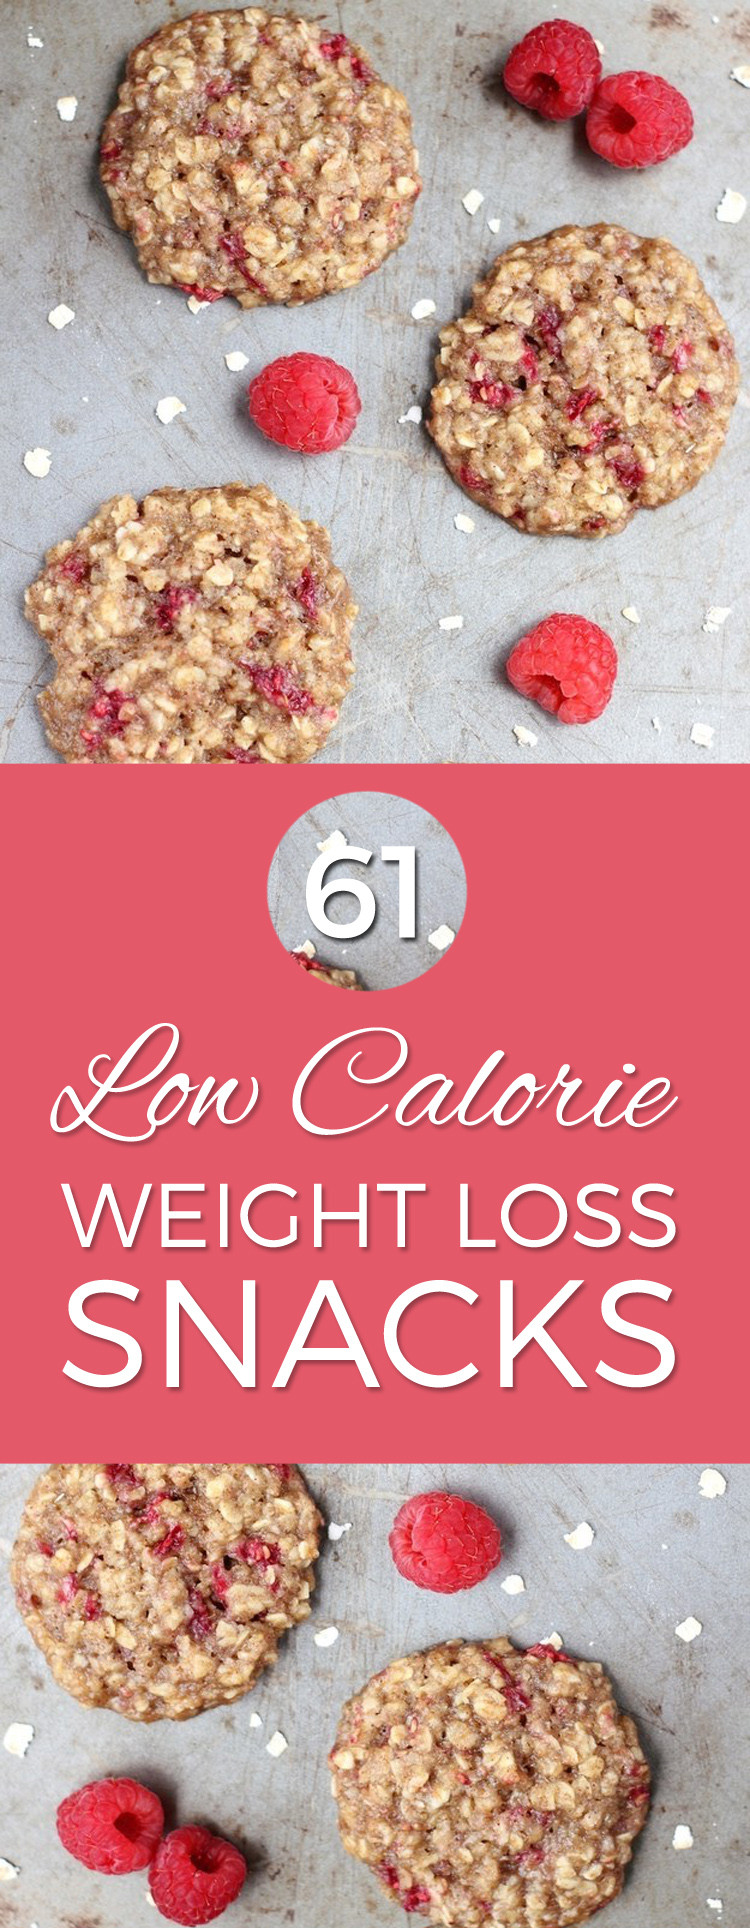 Healthy Low Cal Snacks
 61 Super Healthy Super Low Calorie Snacks To Help You Lose